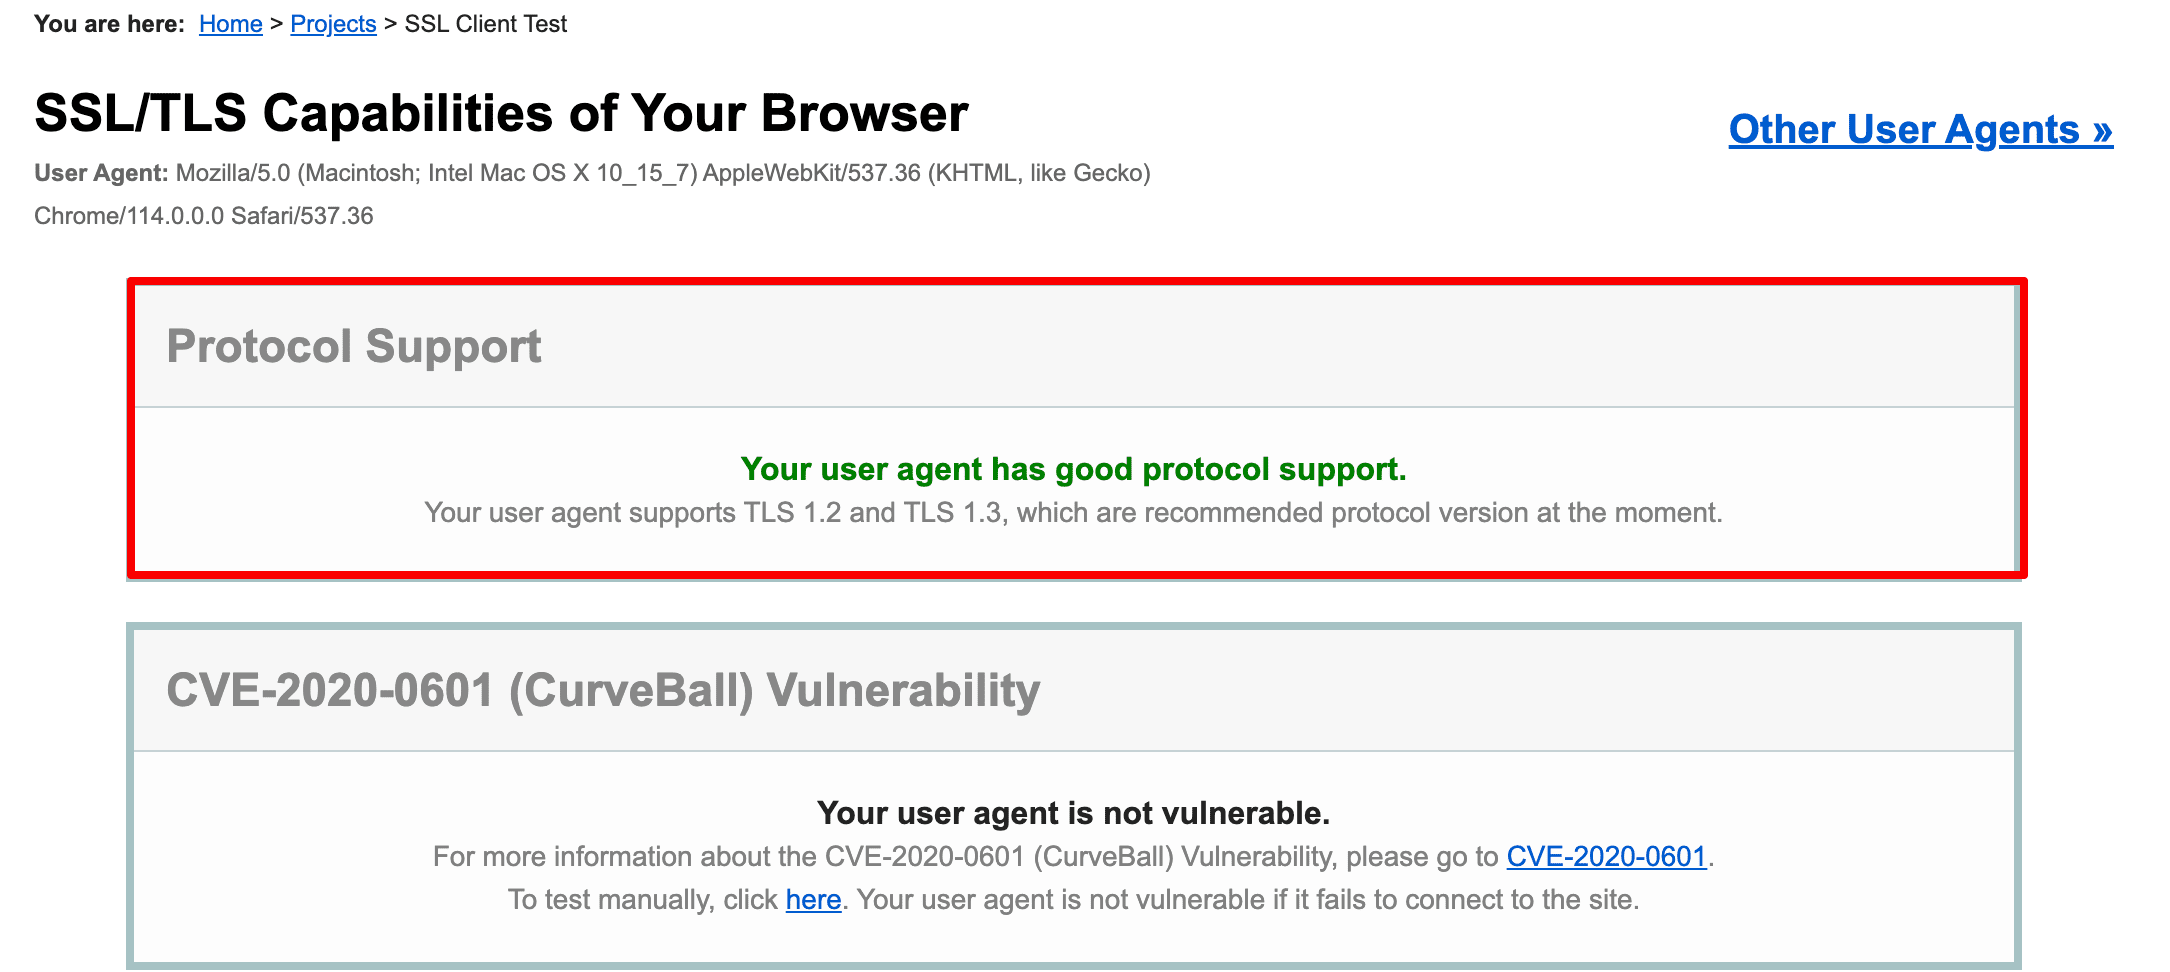 How to check SSL/TSL capabilities of your browser